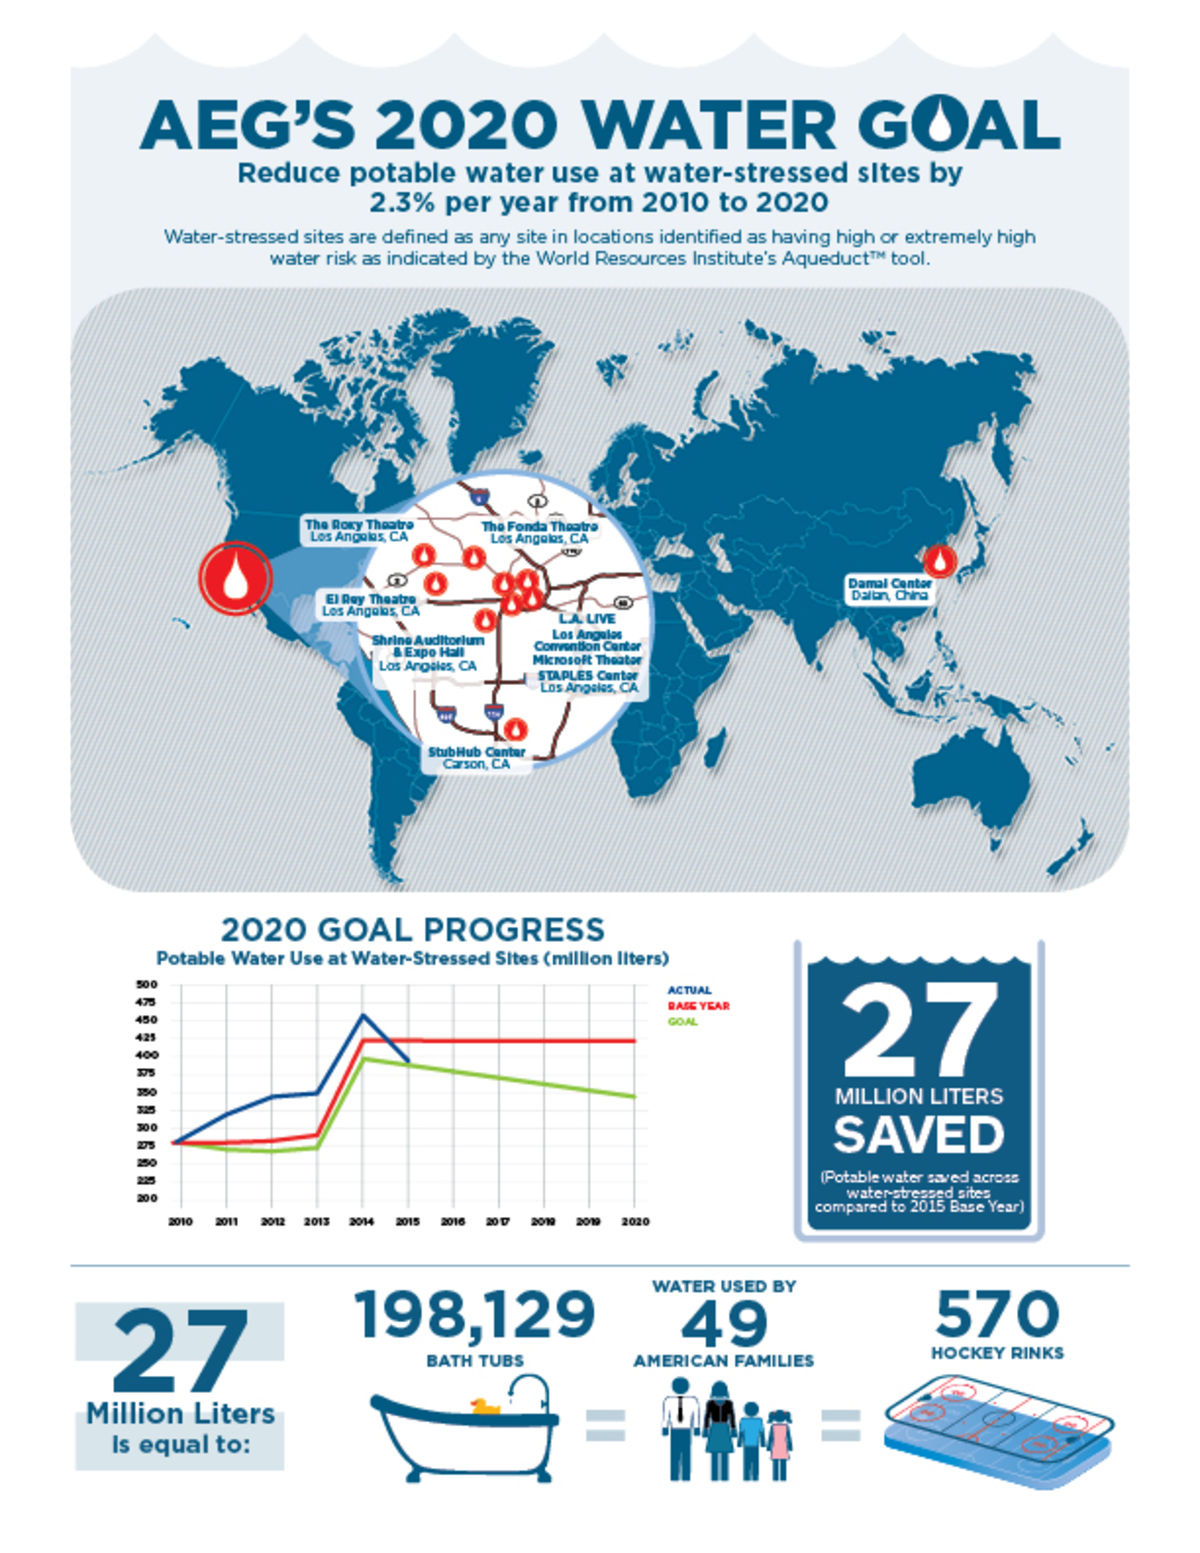 AEG outlines its 2020 Water Goal to reduce potable water use at water-stressed sites by 2.3% per year from 2010 to 2020 with an infographic illustrating 27 million liters of potable water saved compared to 2015 Base Year.